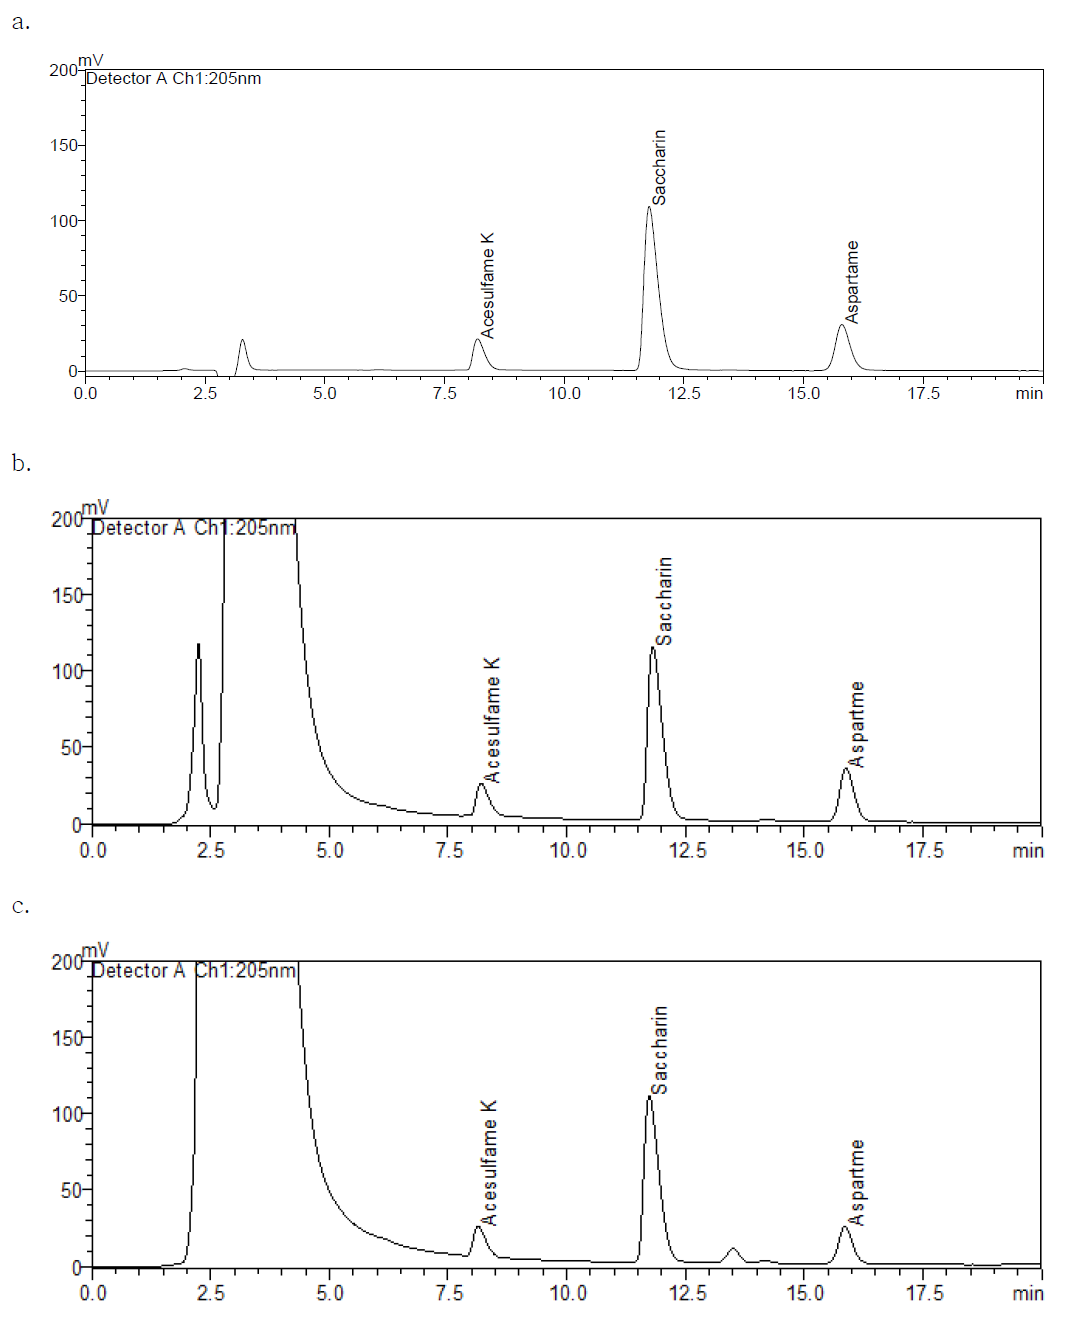 HPLC chromatograms of standard solution and livestock processed foods piked with three sweetener